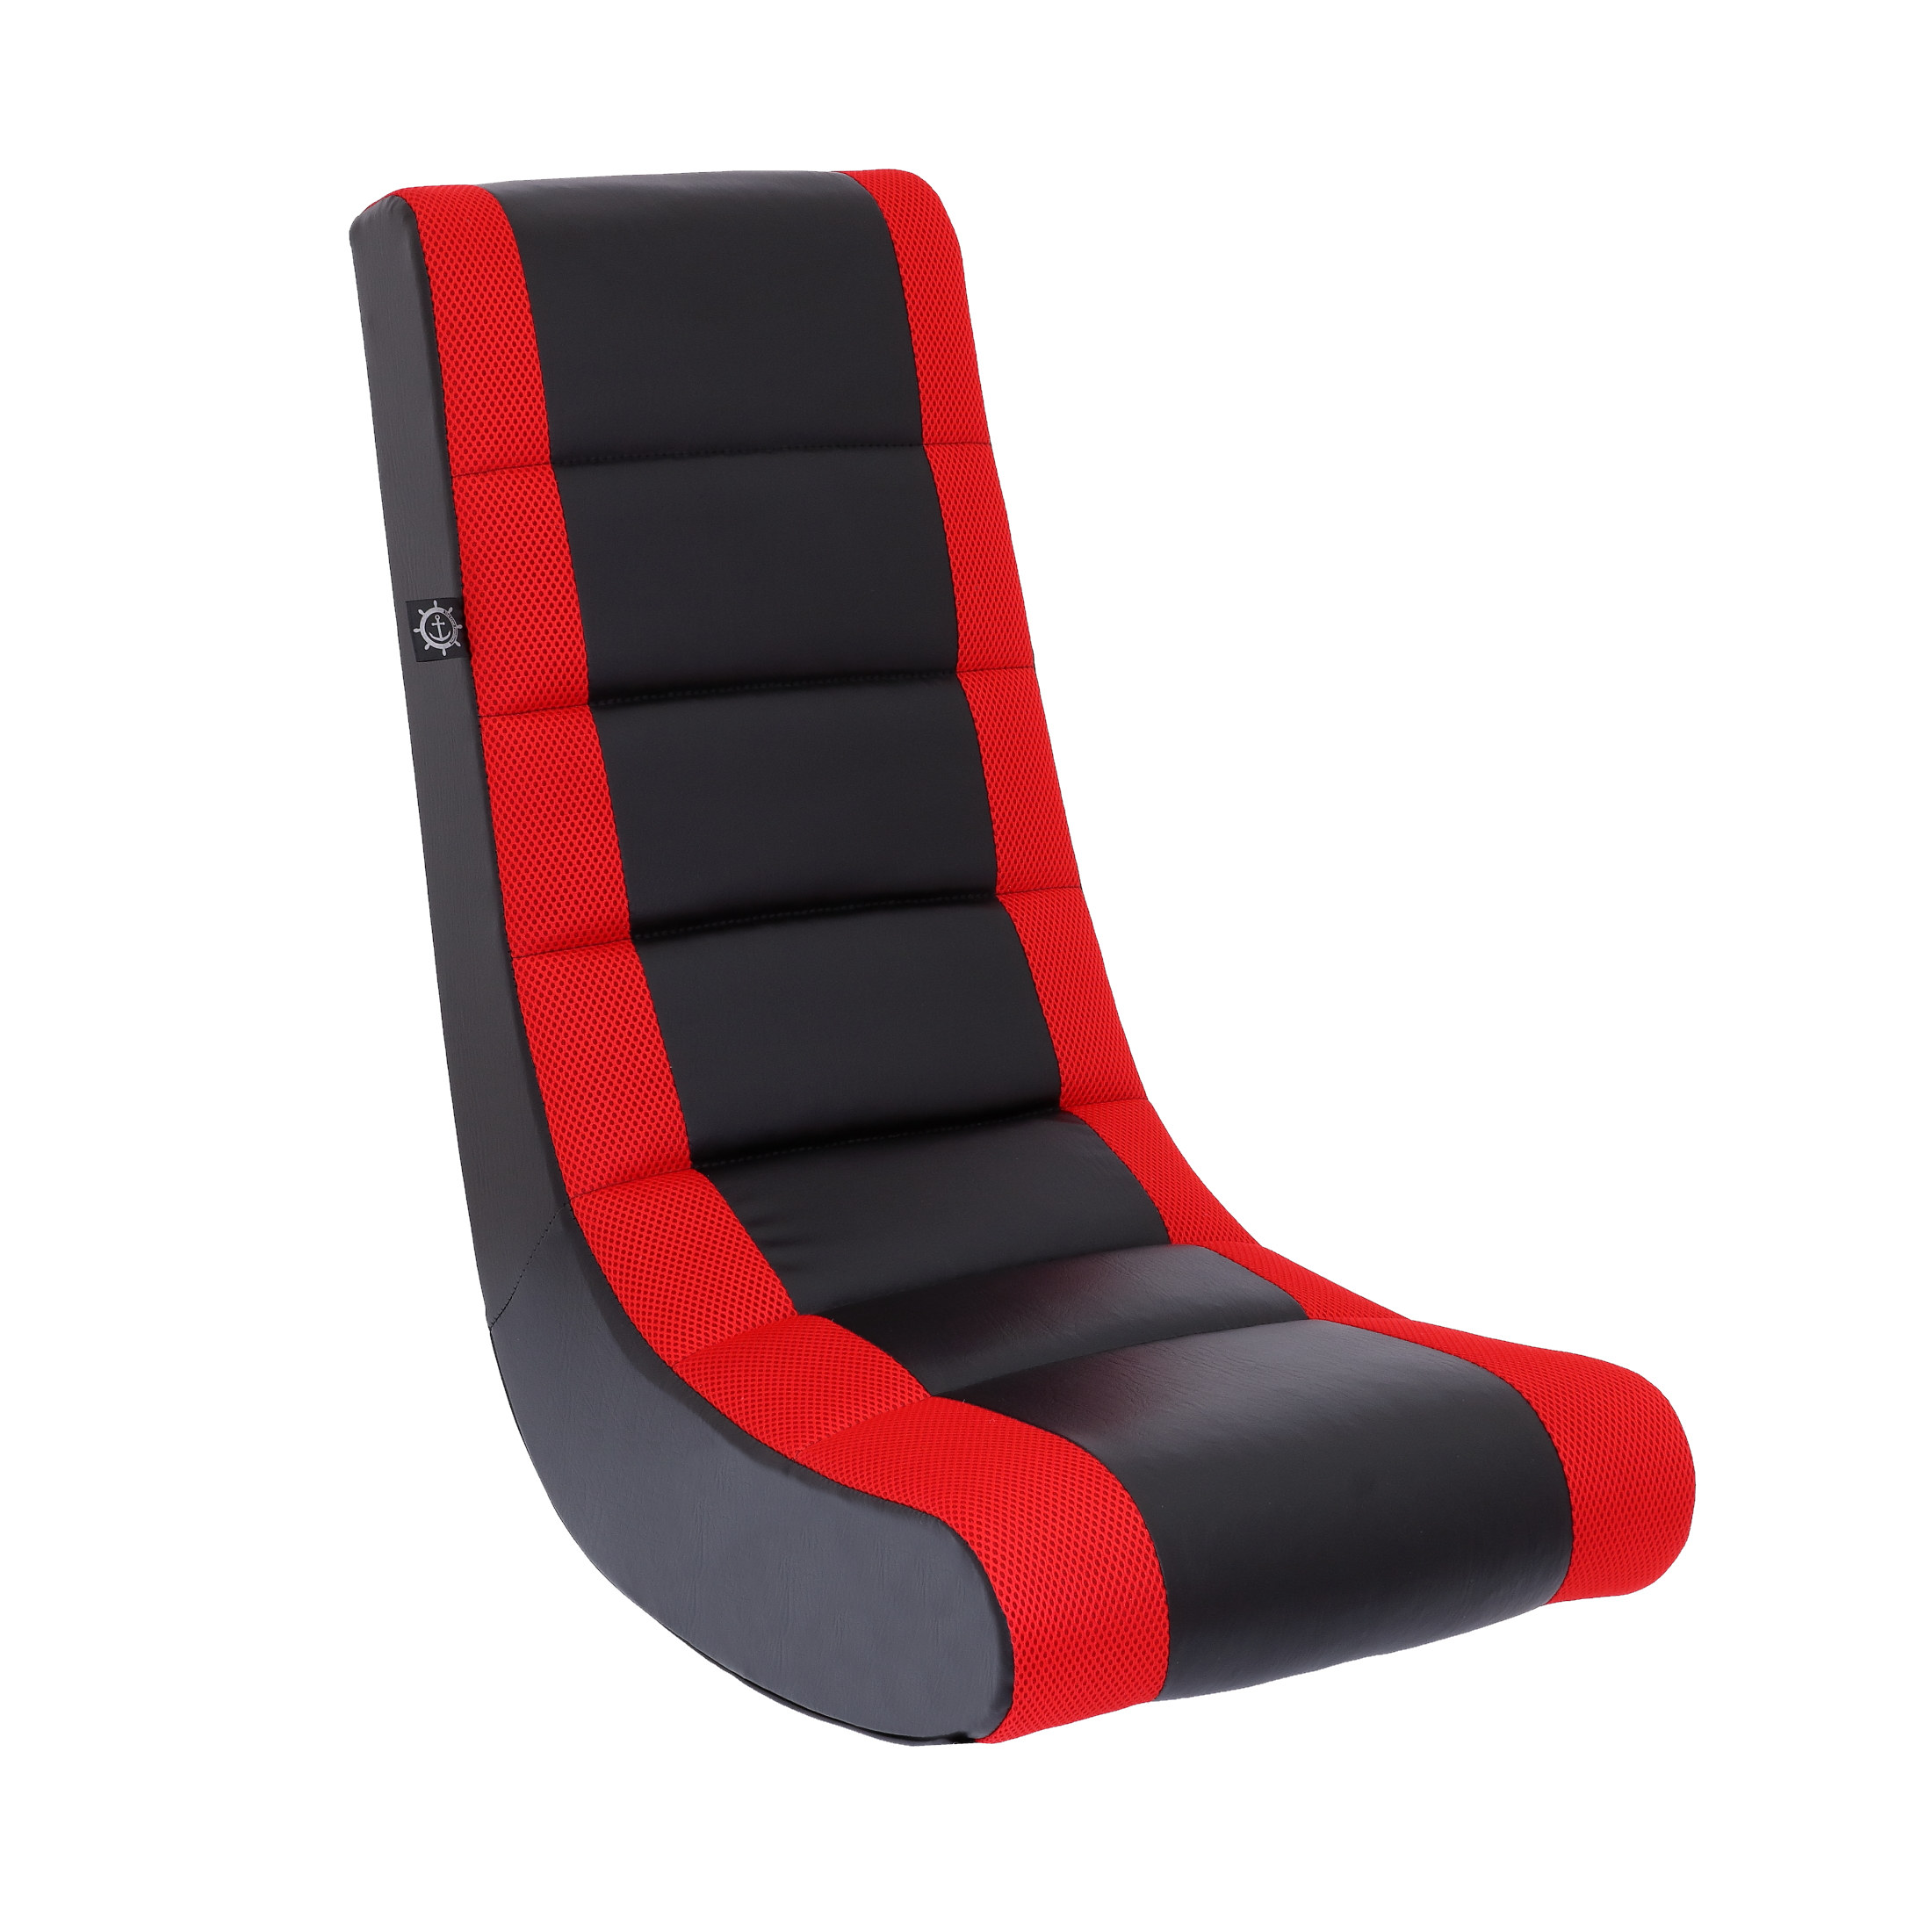 The Crew Furniture Classic Video Rocker Gaming Chair